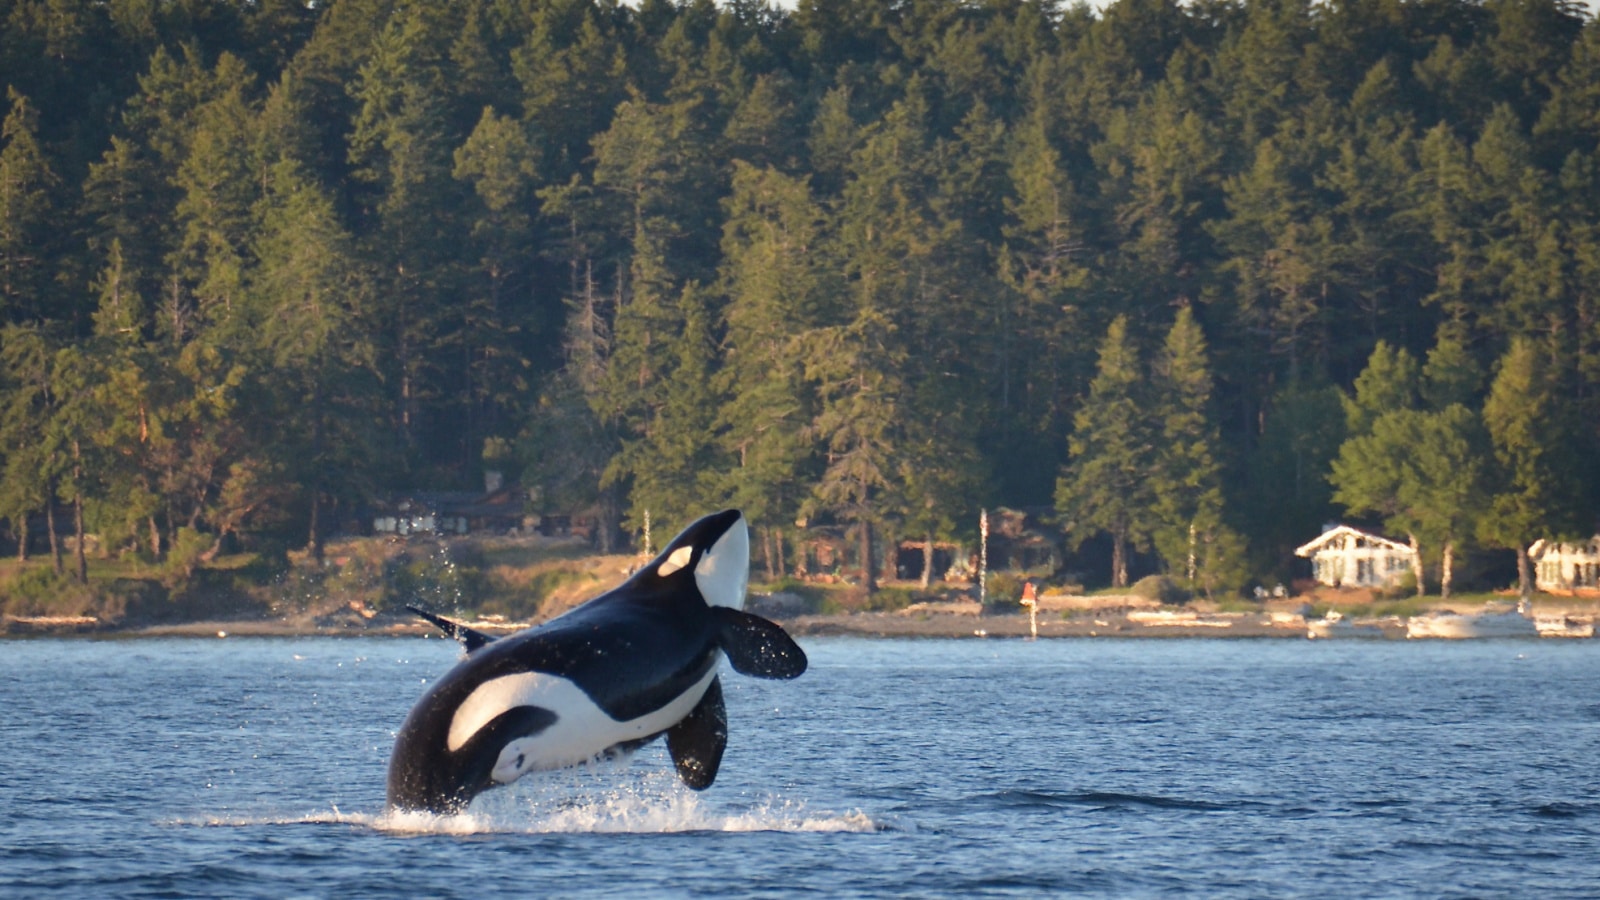 An endangered Southern Resident Killer Whale, an icon of the Pacific Northwest, breaches near Henry Island in Washington State.